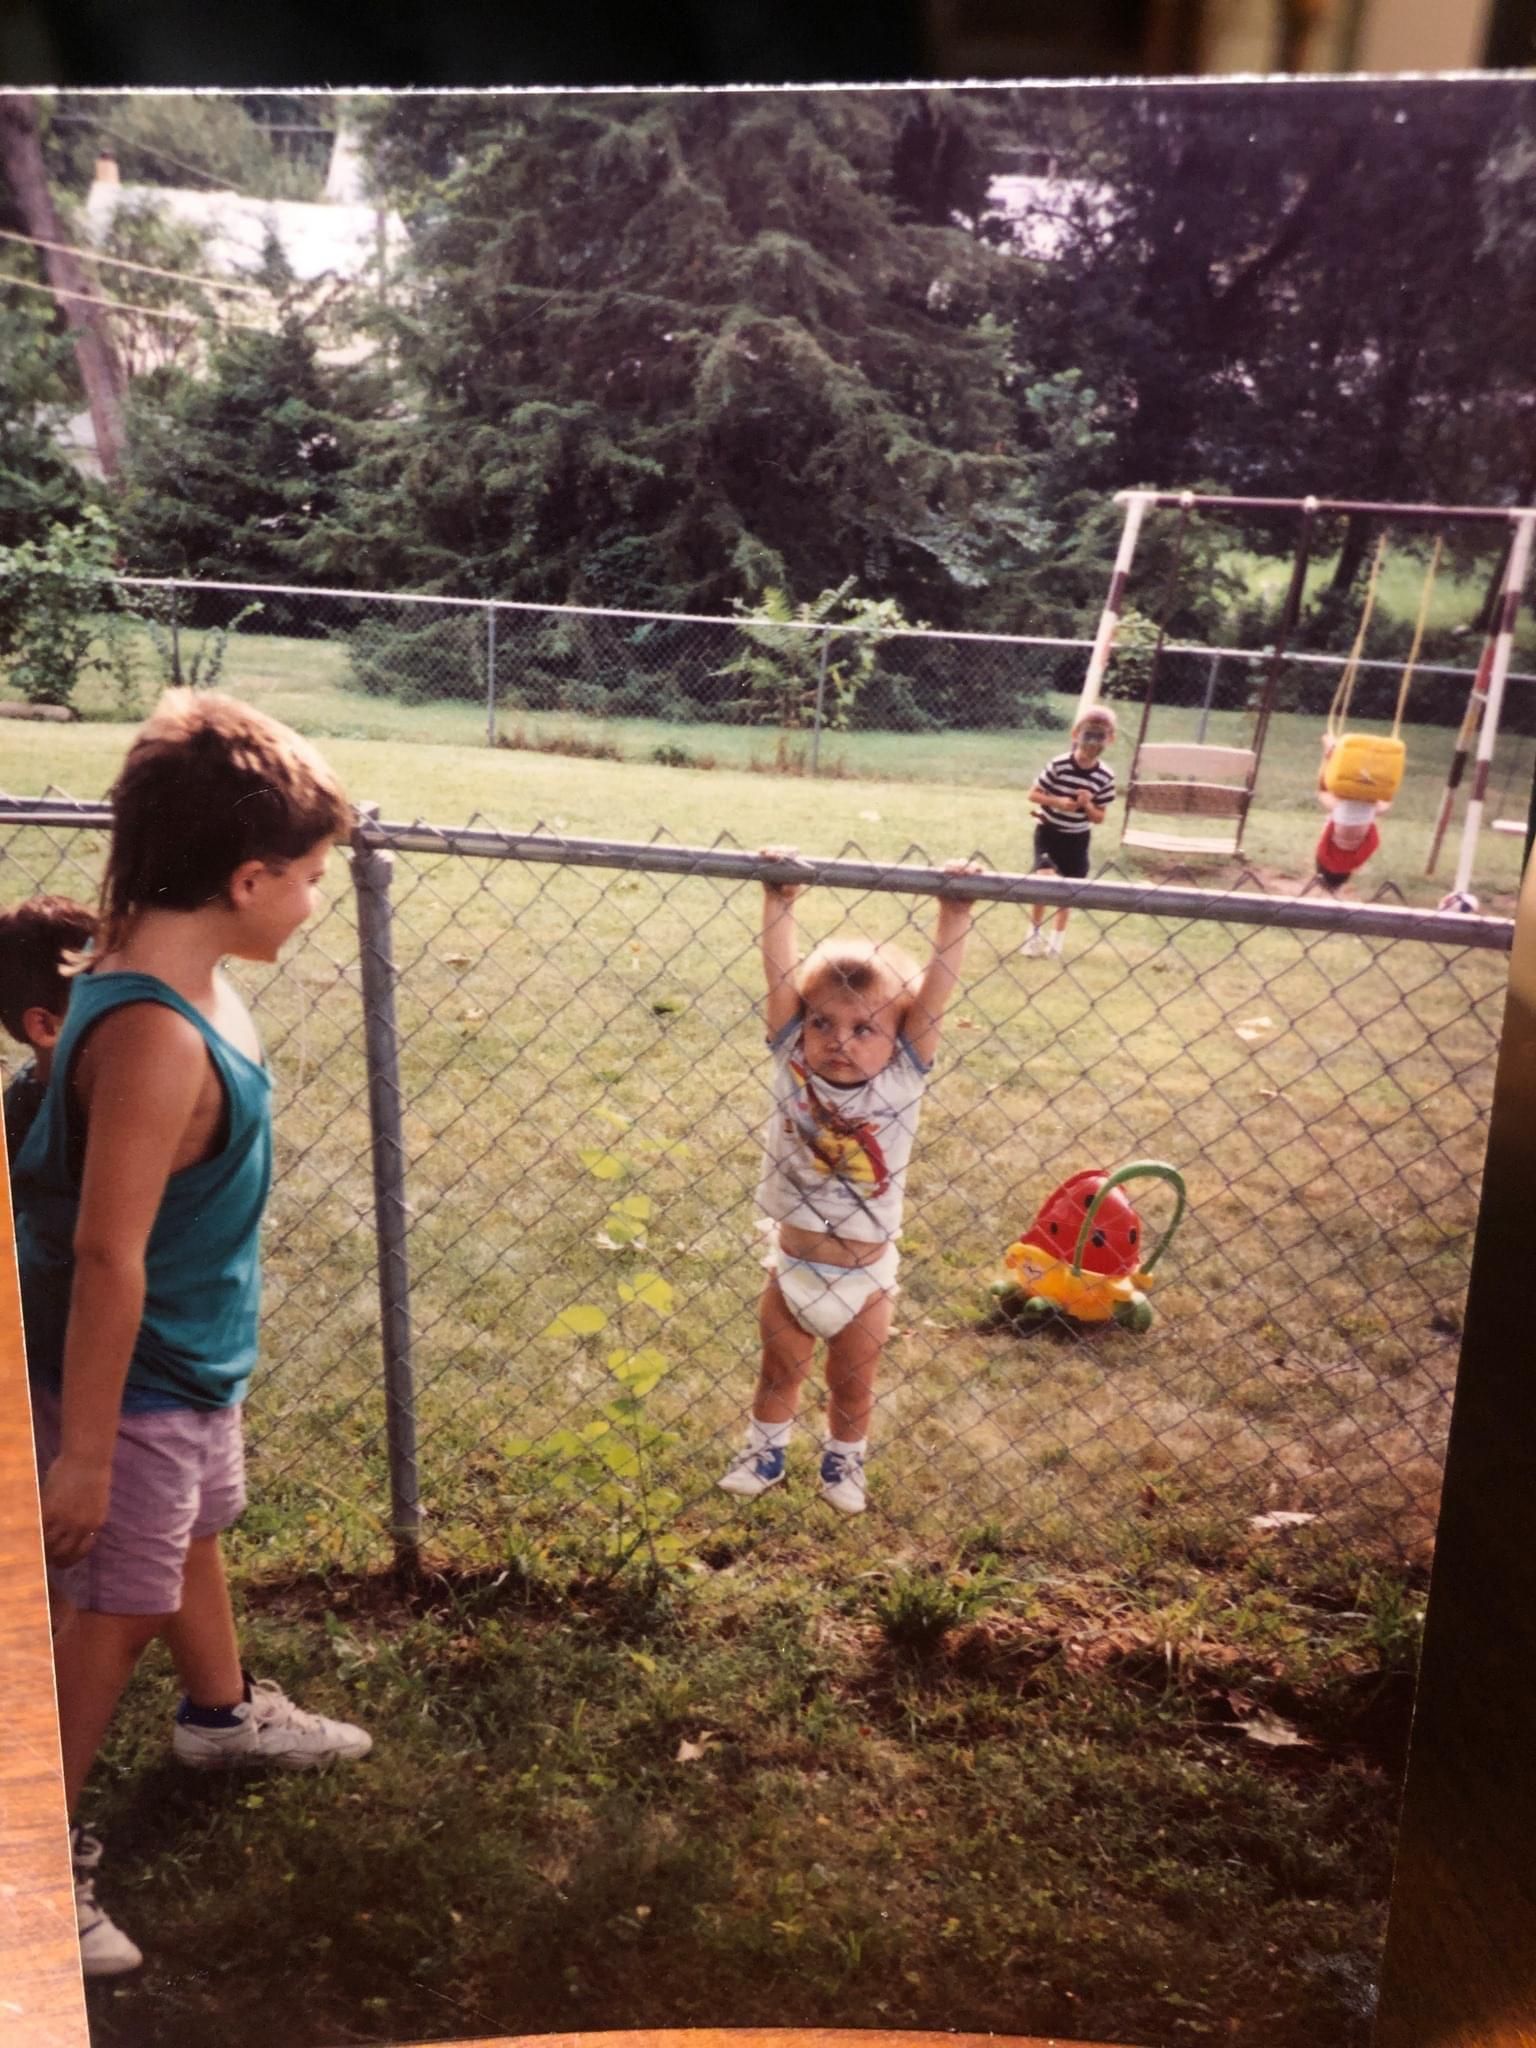 Just me, a kid. Stuck on a fence in a diaper. Neighbors kids gettin their kicks, sister is about to eat dirt, brother creepin around back there.